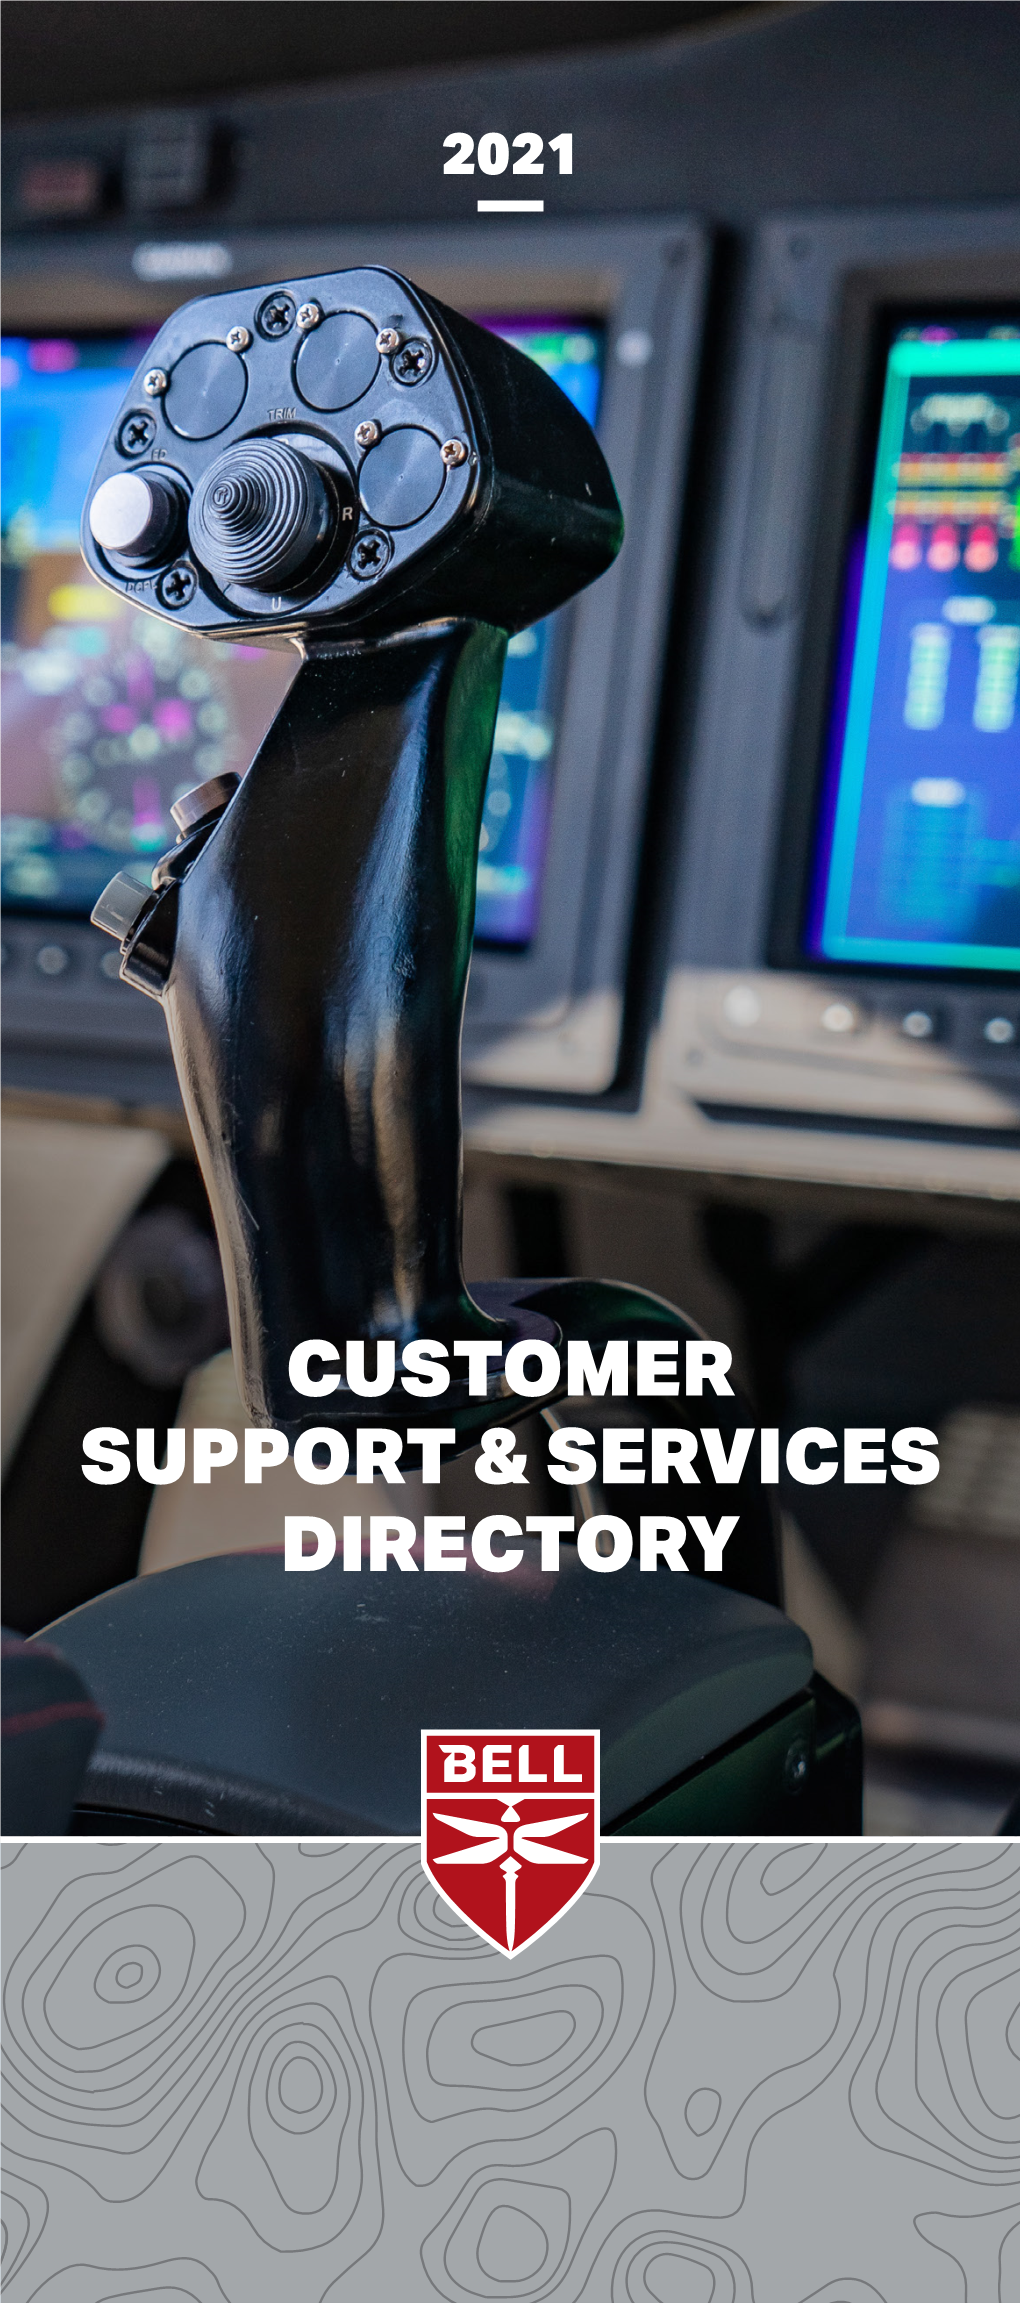 Customer Support & Services Directory